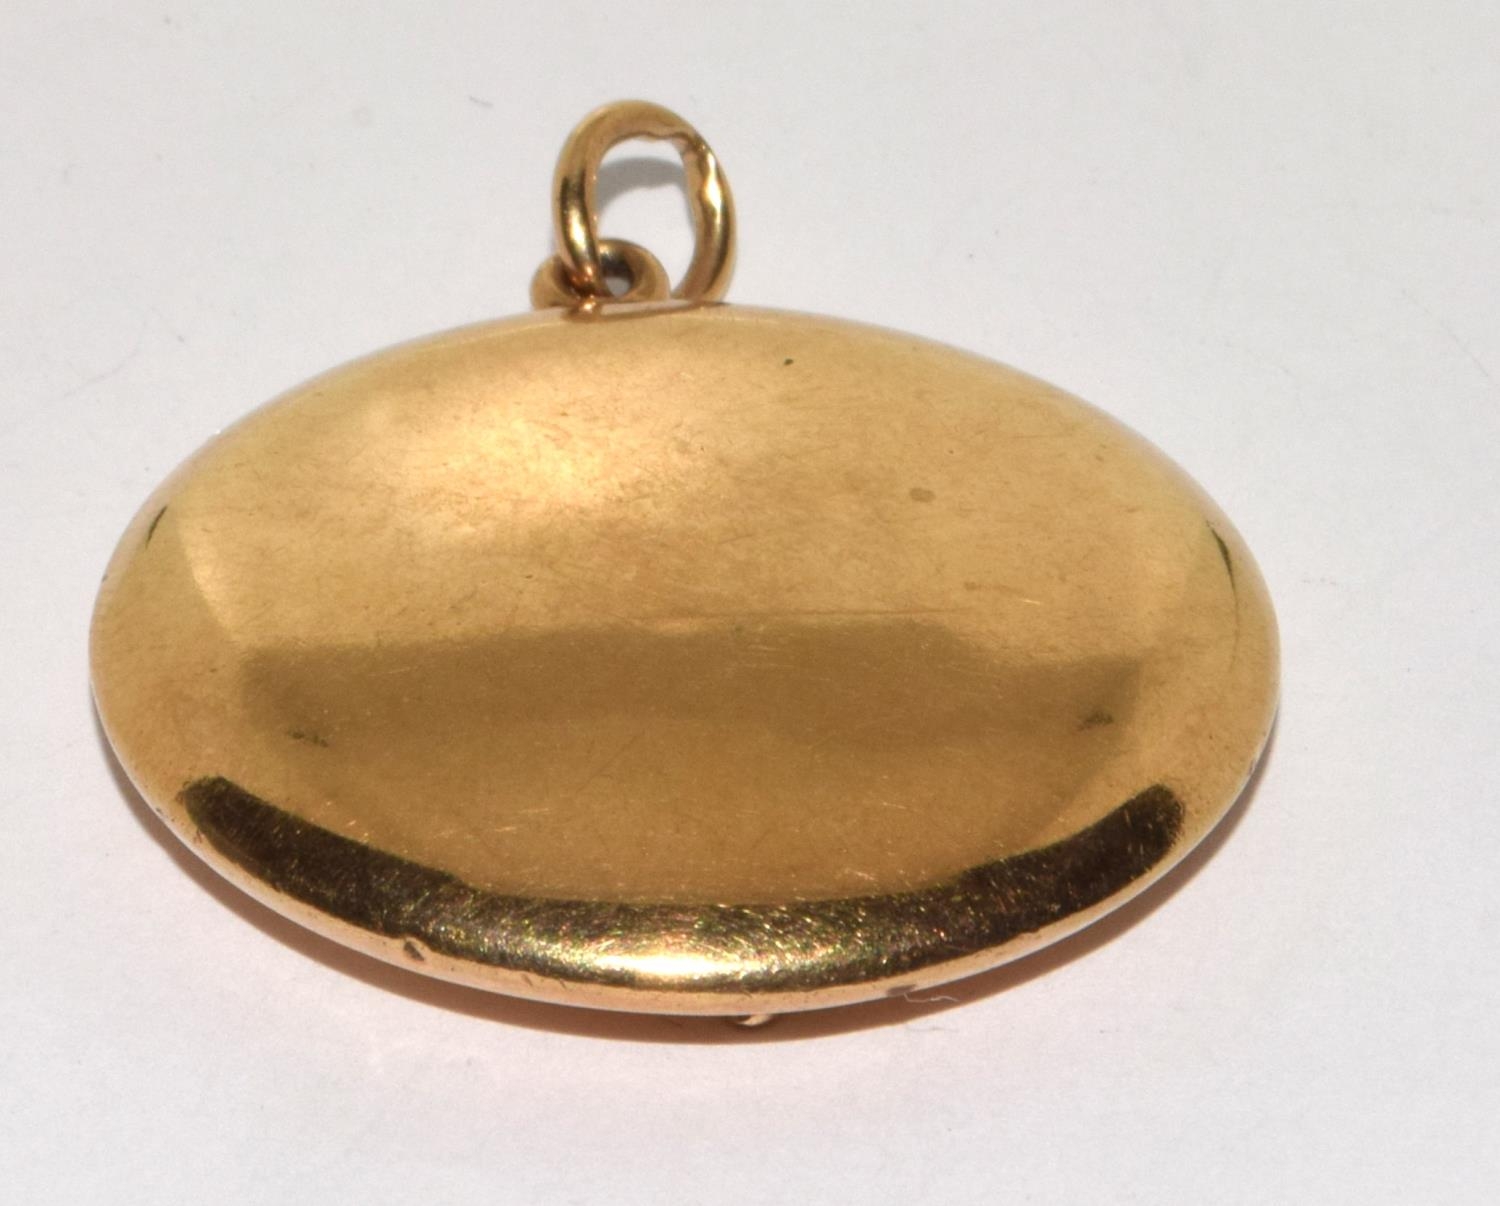 9ct gold ladies small size compact fob total 14g - Image 3 of 5